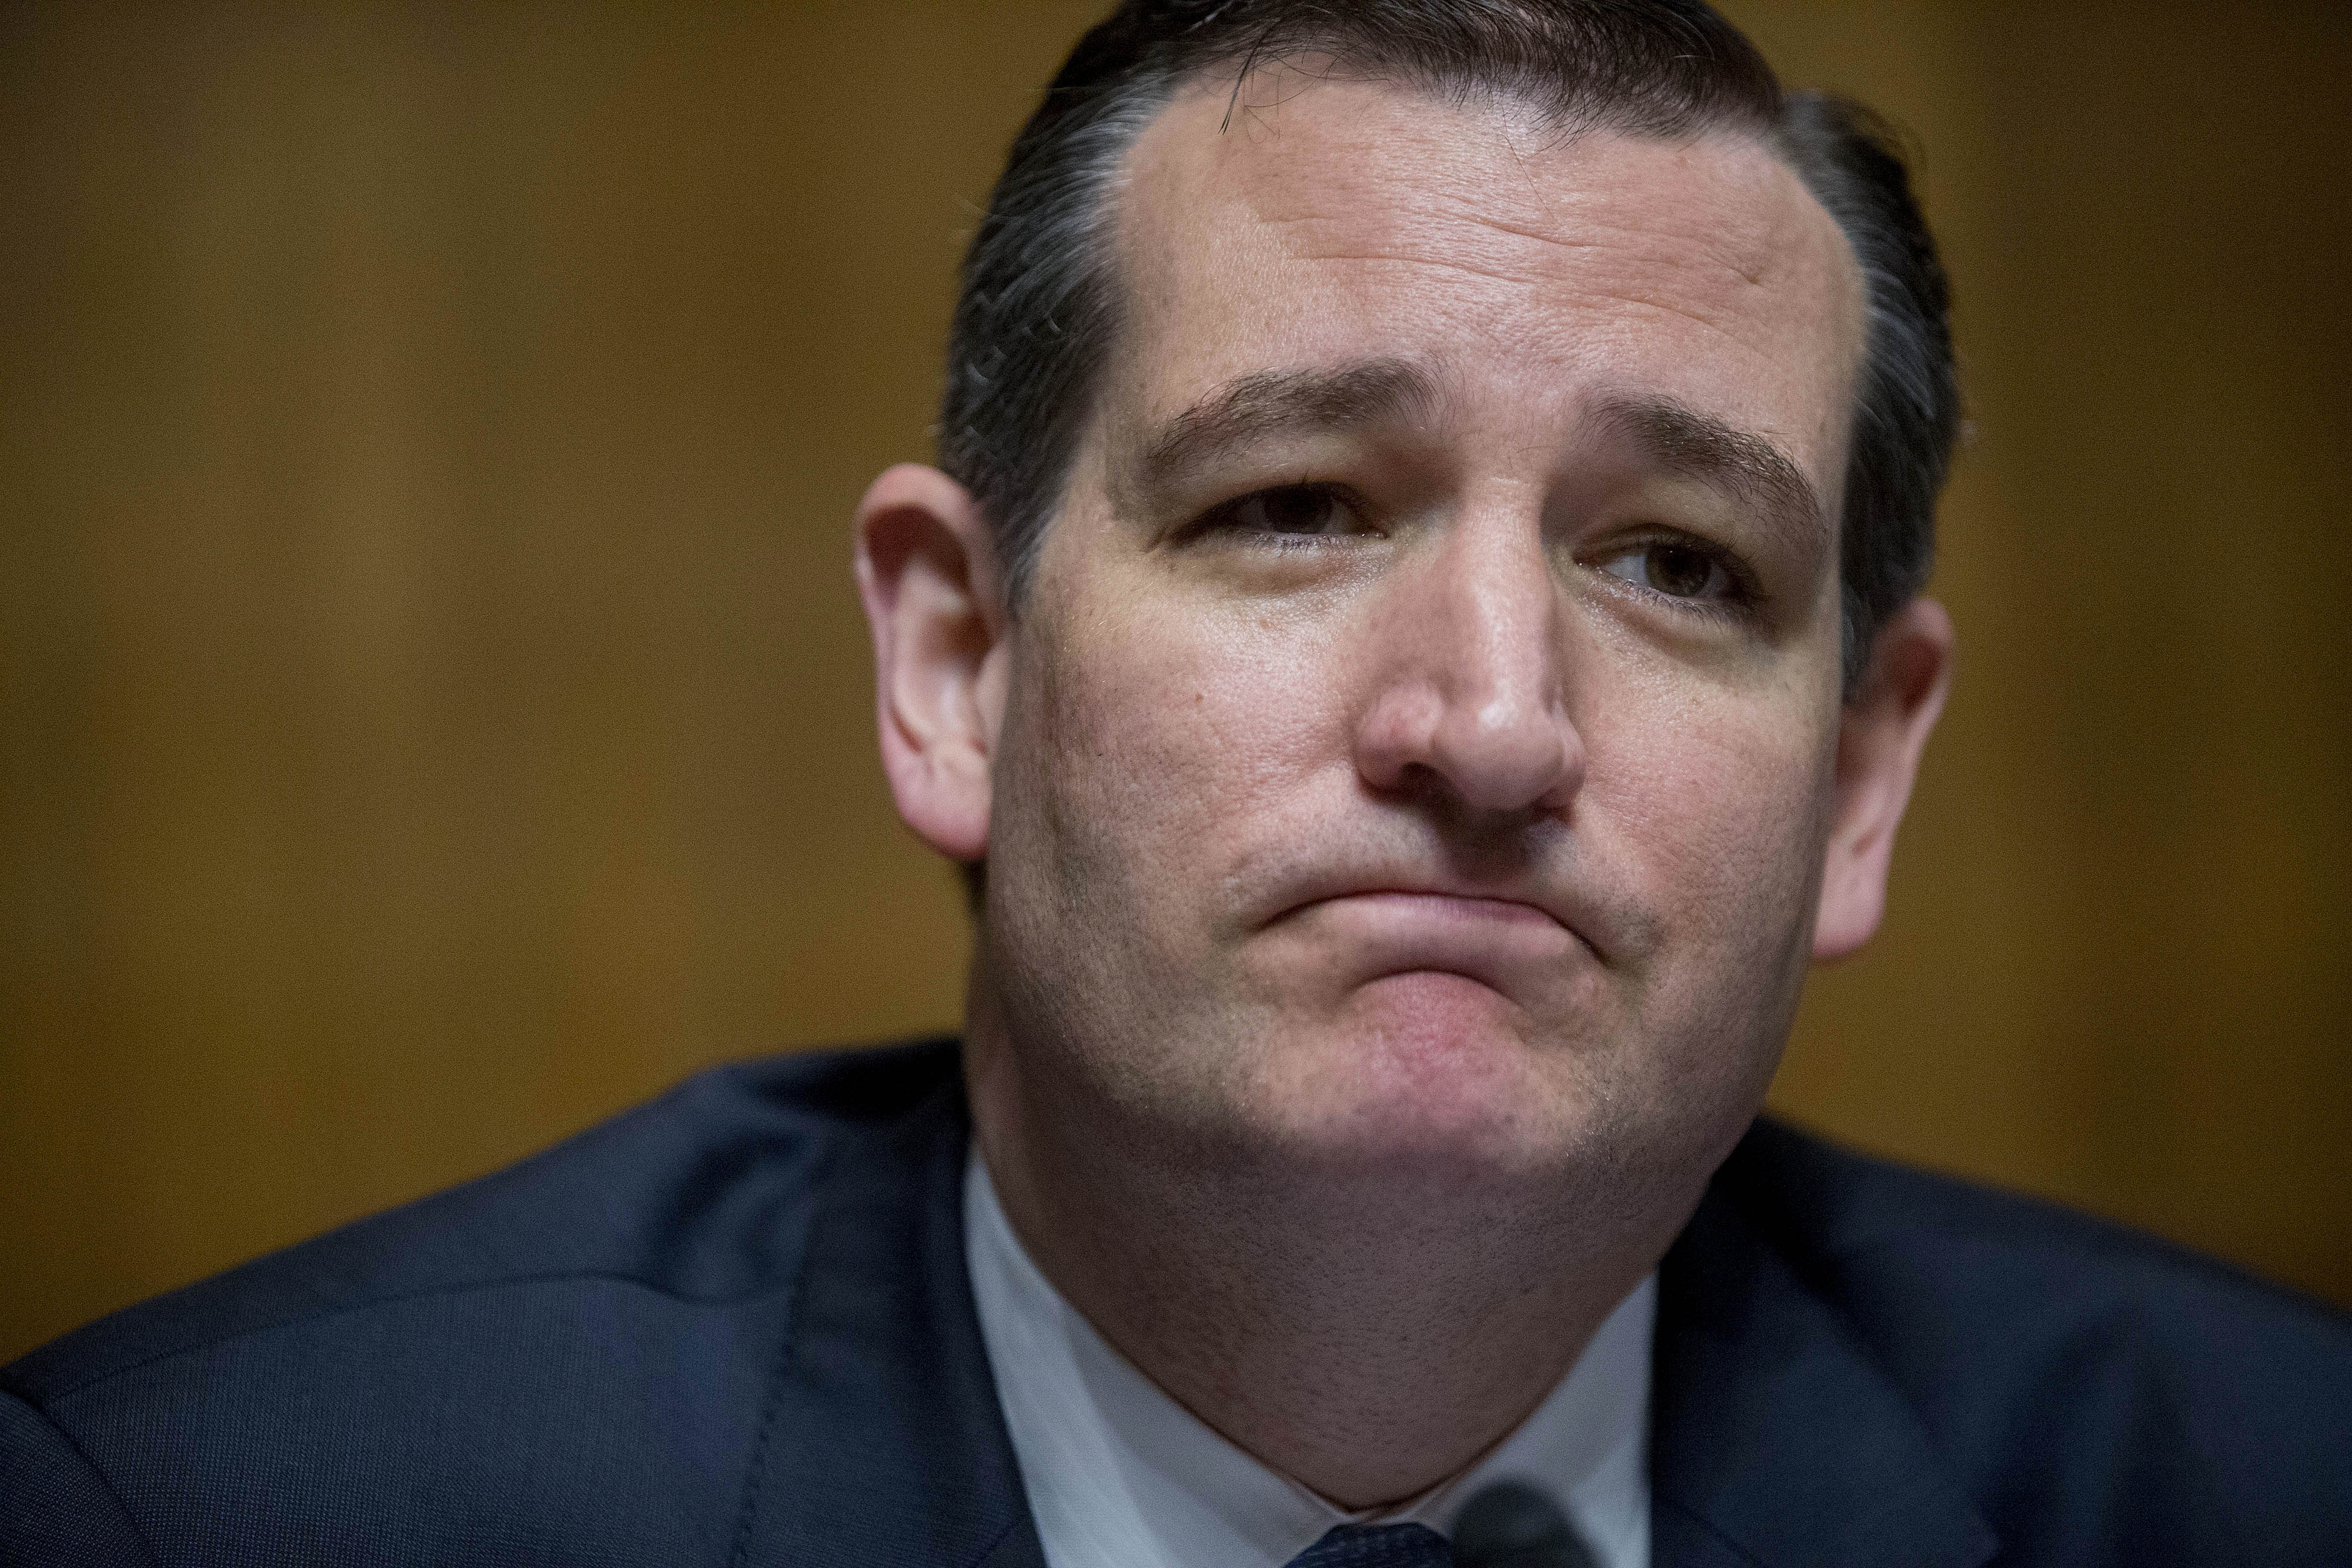 Senator Ted Cruz, a Republican from Texas, U.S. 2016 presidential candidate and chairman of the Senate Judiciary Subcommittee on oversight, agency action, federal rights and federal courts, pauses while speaking during a hearing in Washington, D.C., on June 4, 2015. (Andrew Harrer—Bloomberg)